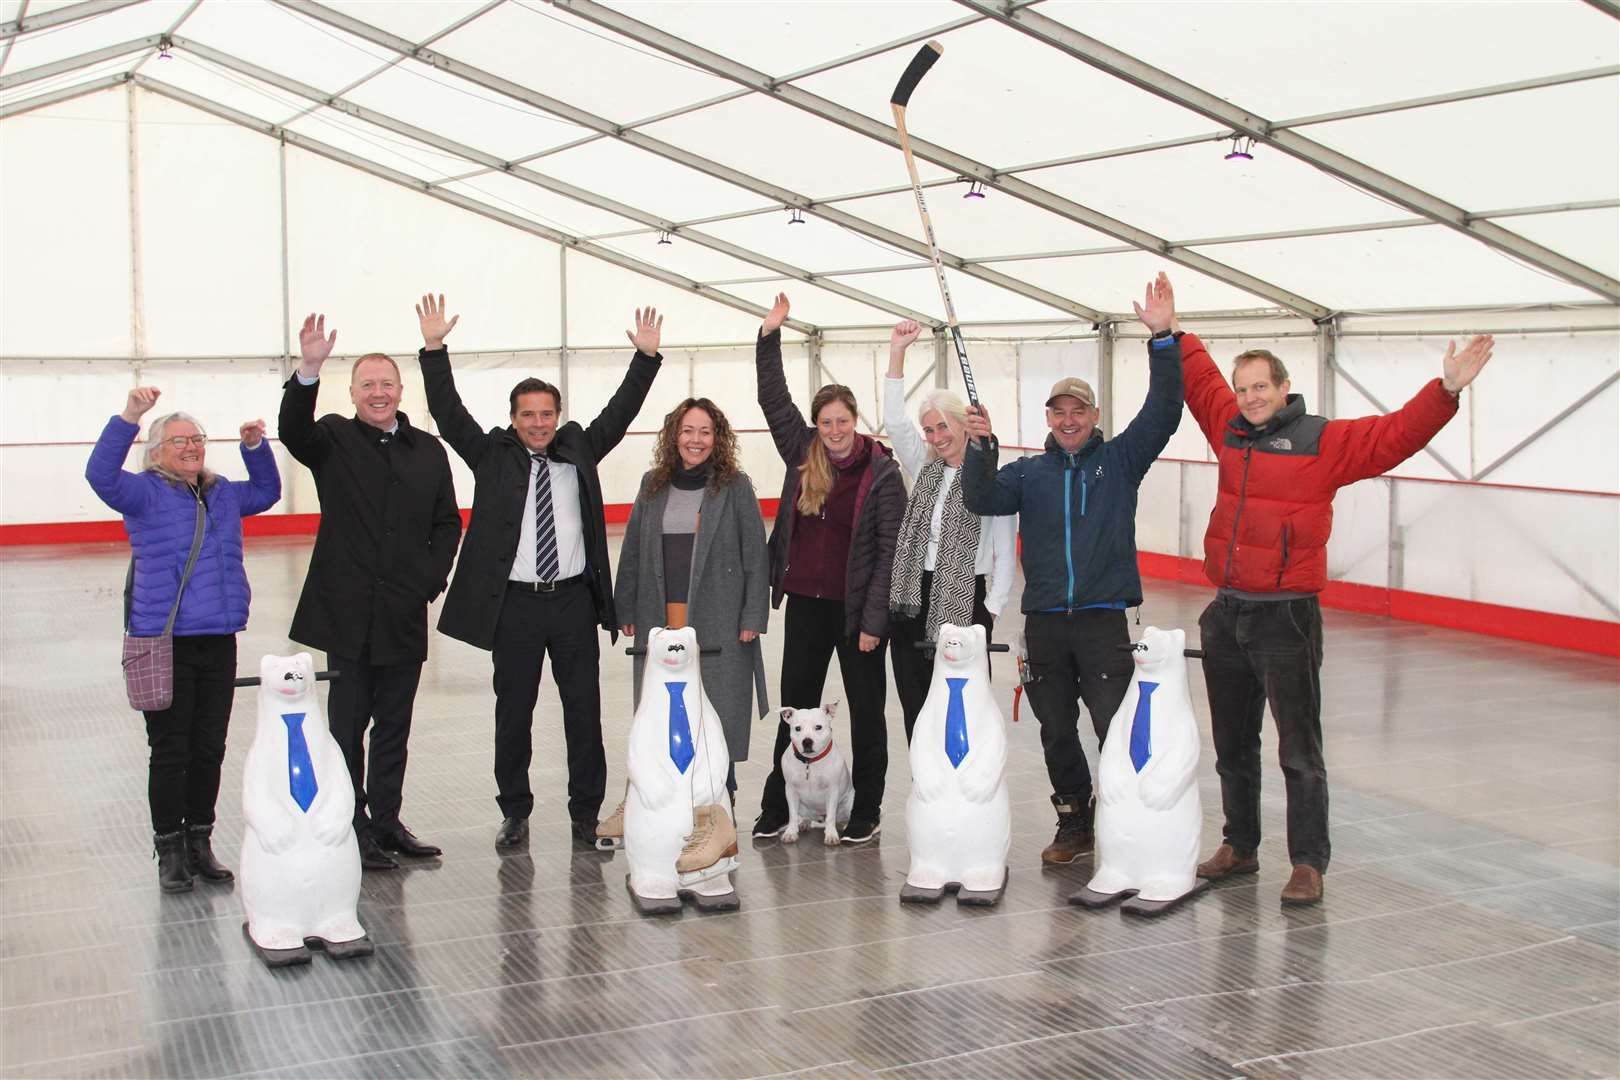 Celebrating a great achievement are Janis Bootle, Iain Miller, Duncan Swarbrick, Lee Bissett, Amanda Clinton, Kirsty Bruce, Mike Gale and Mike Dearman. Now is it up to residents in the strath and visitors to support the ice rink.